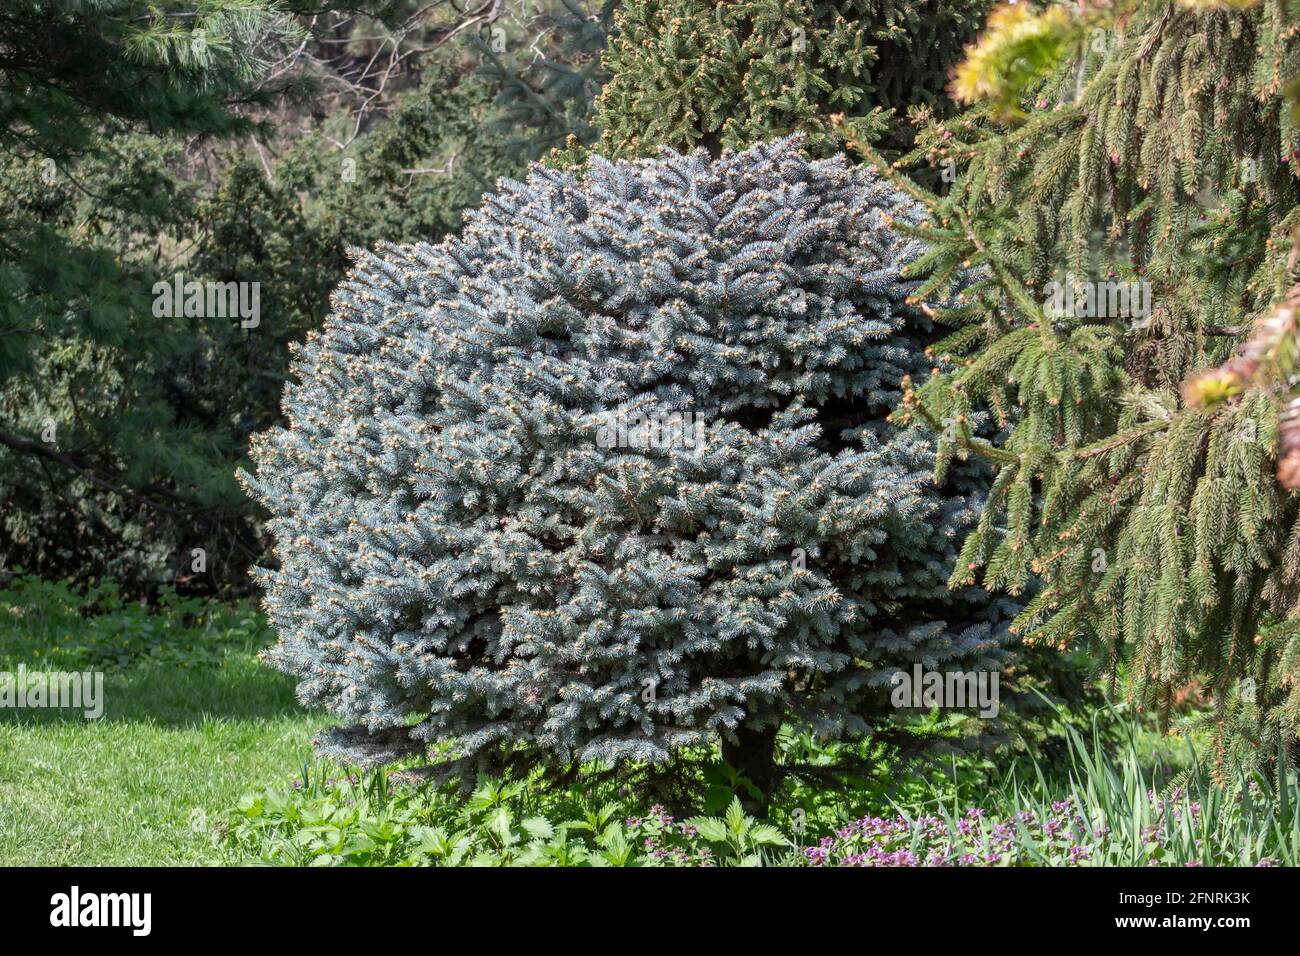 Decorative blue Christmas tree, Picea pungens, round tree growing in the park Stock Photo